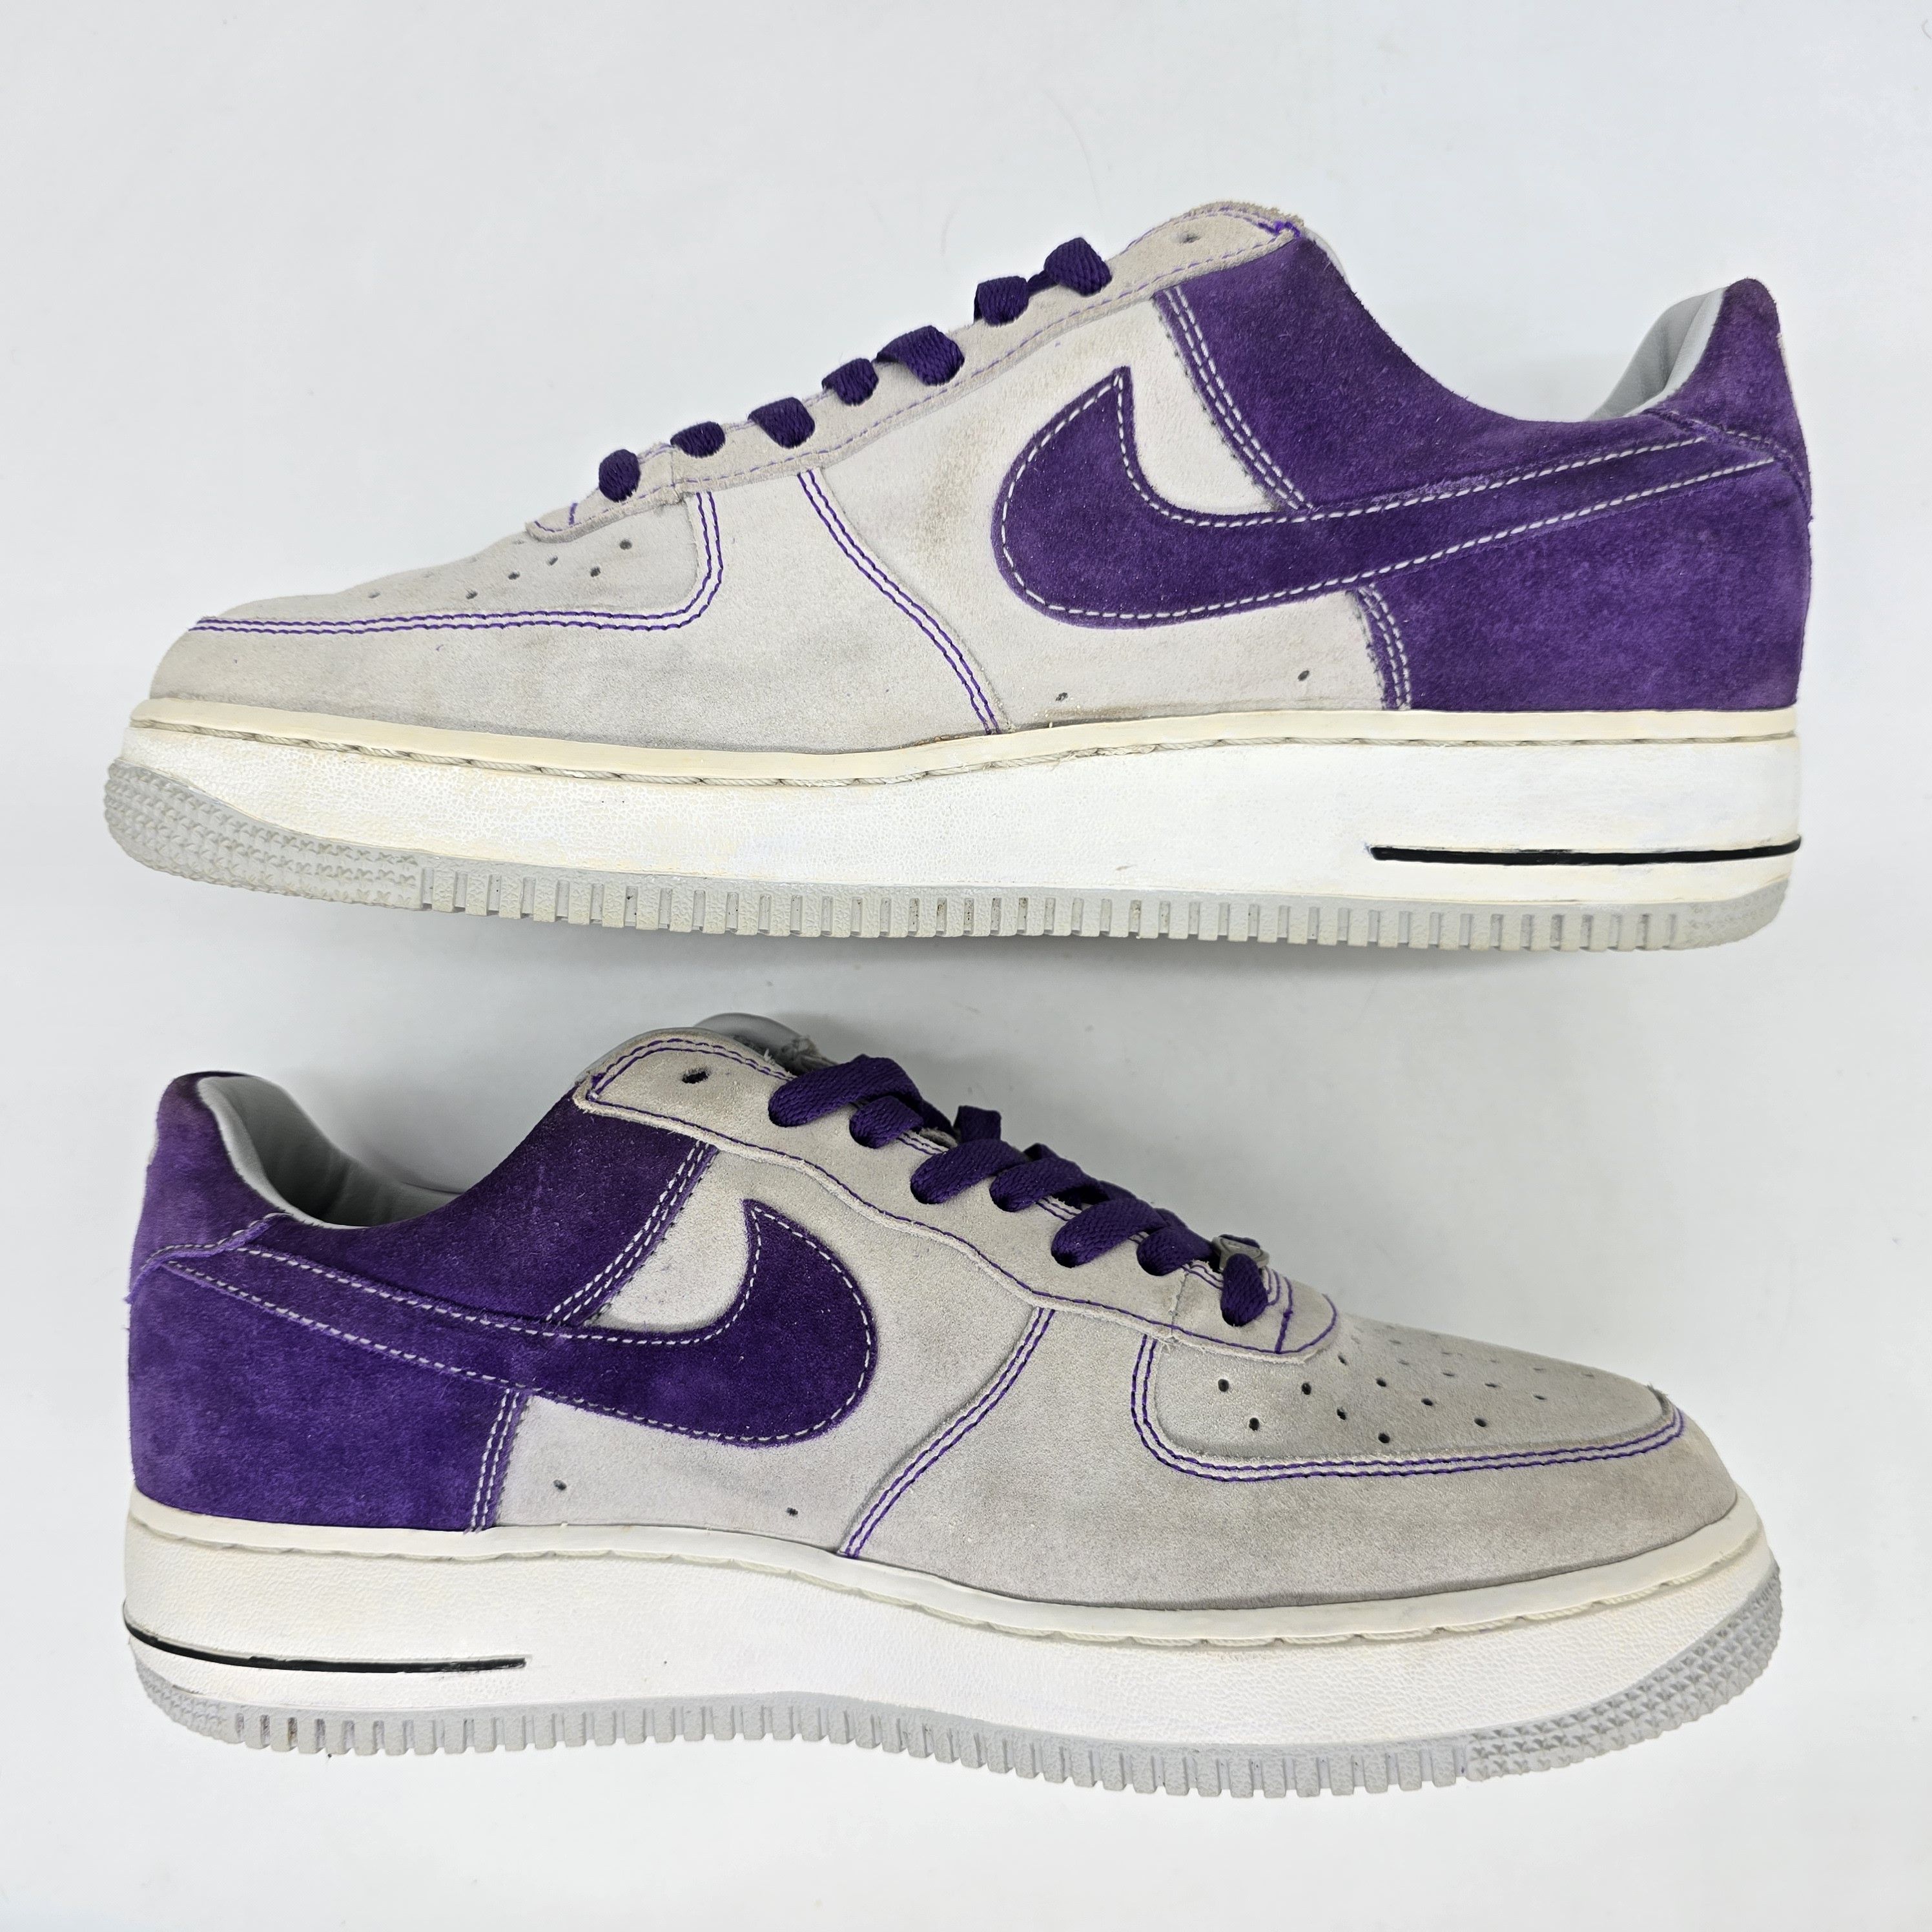 Nike - 2005 Airforce 1 Chamber of Fear "Hype" - 7